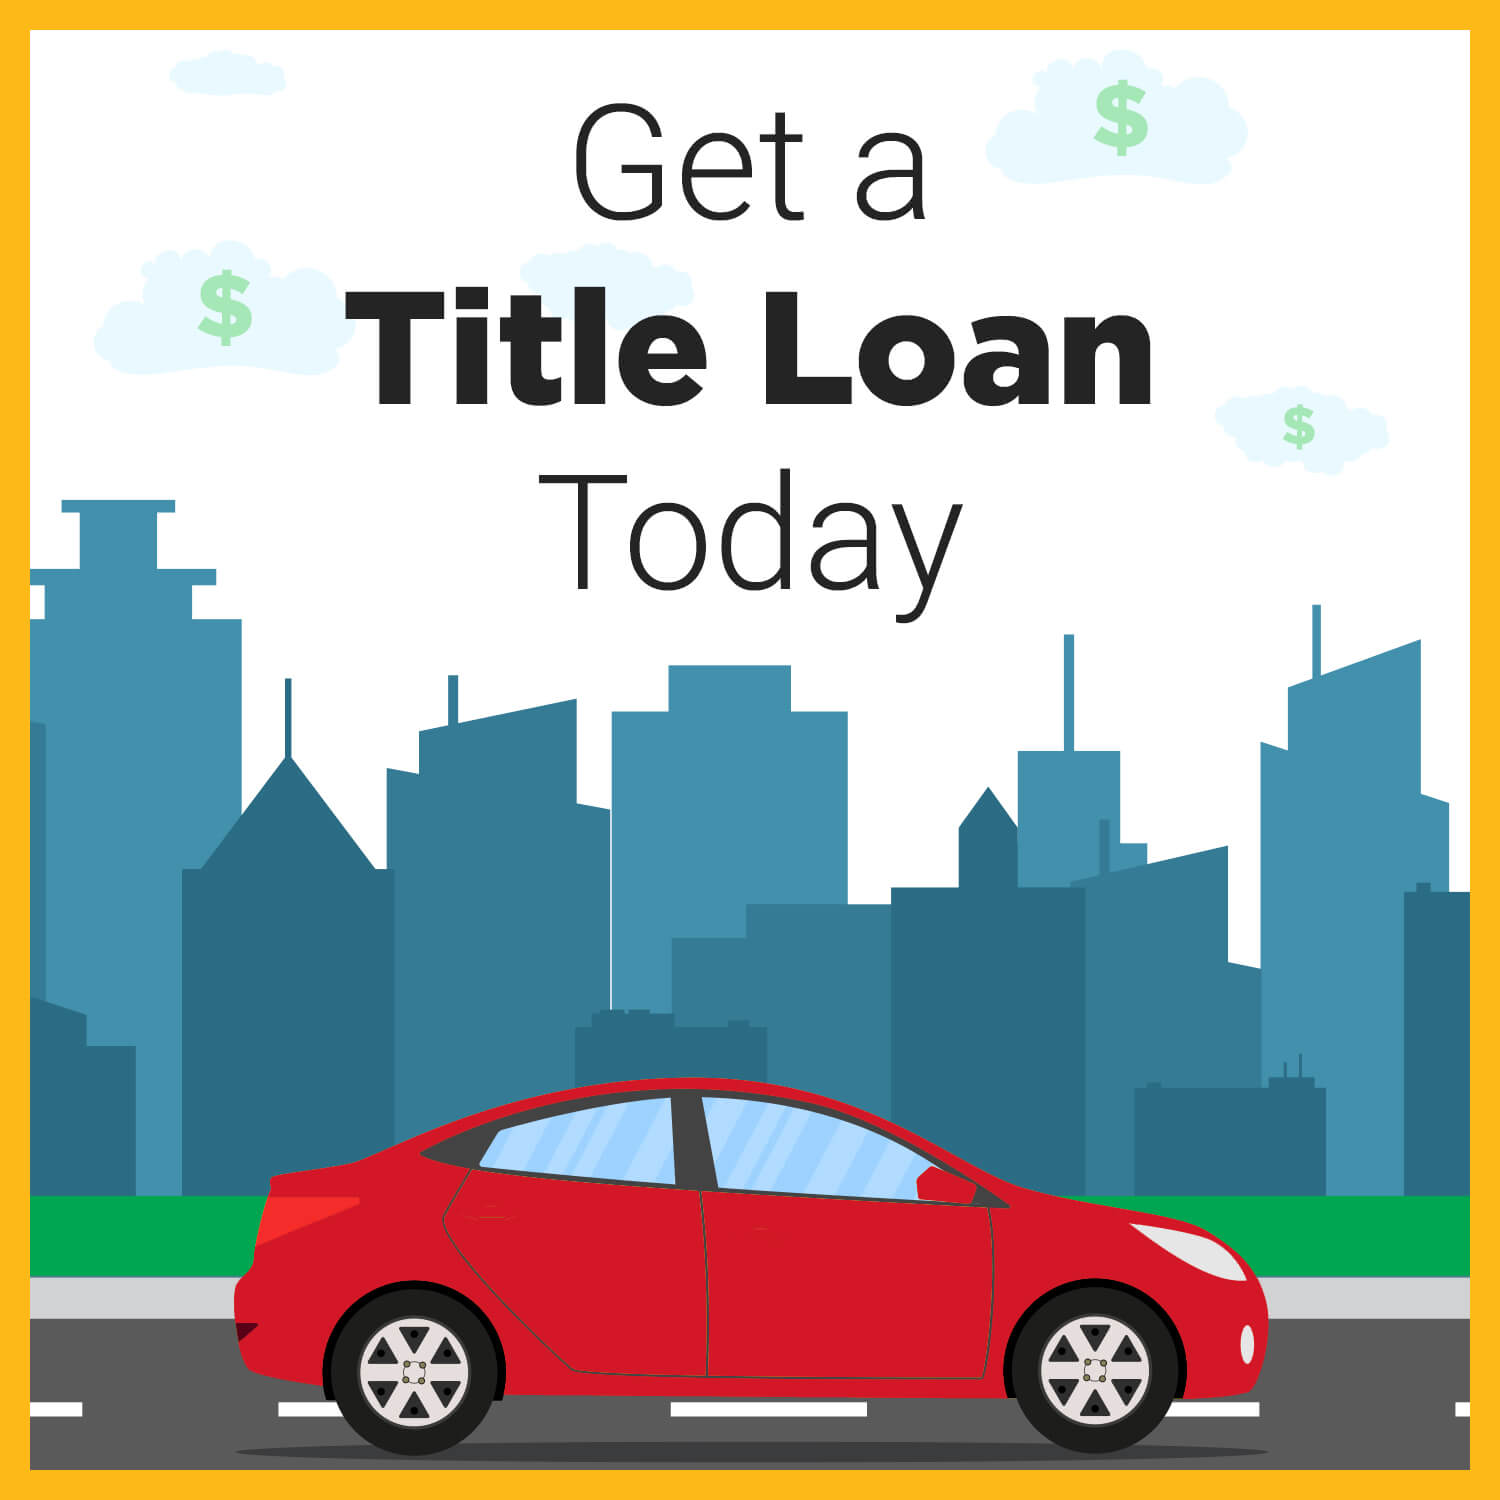 getting title loans in tennessee